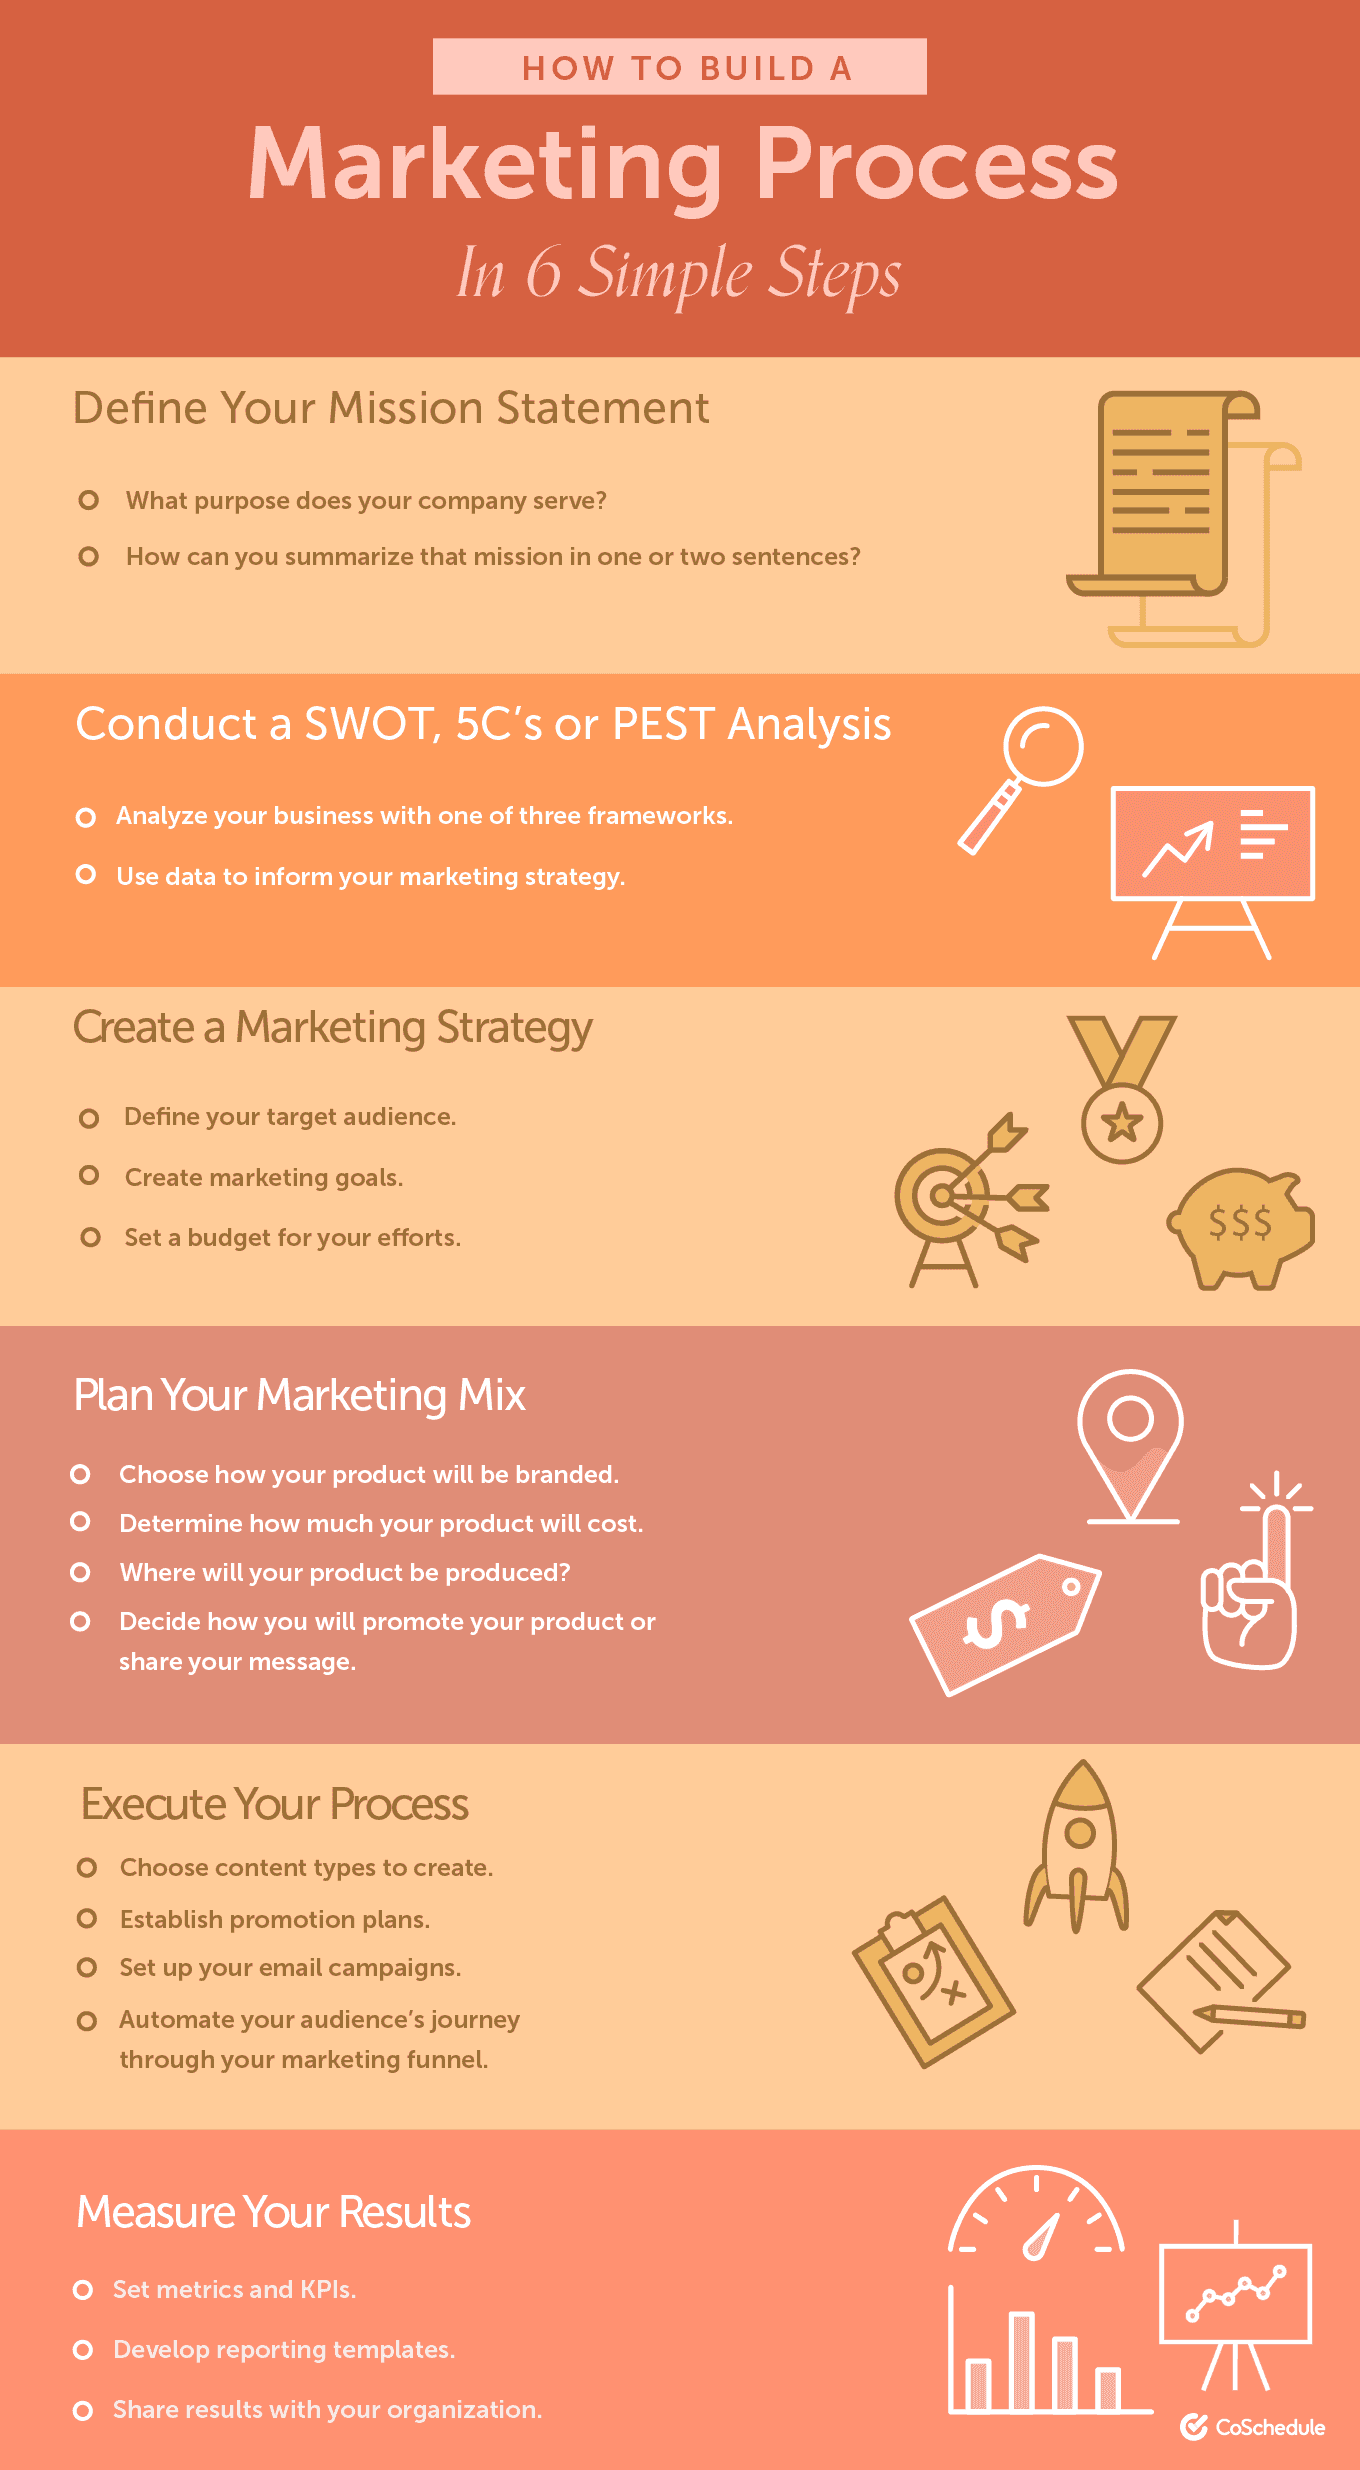 How to build a marketing process in 6 simple steps